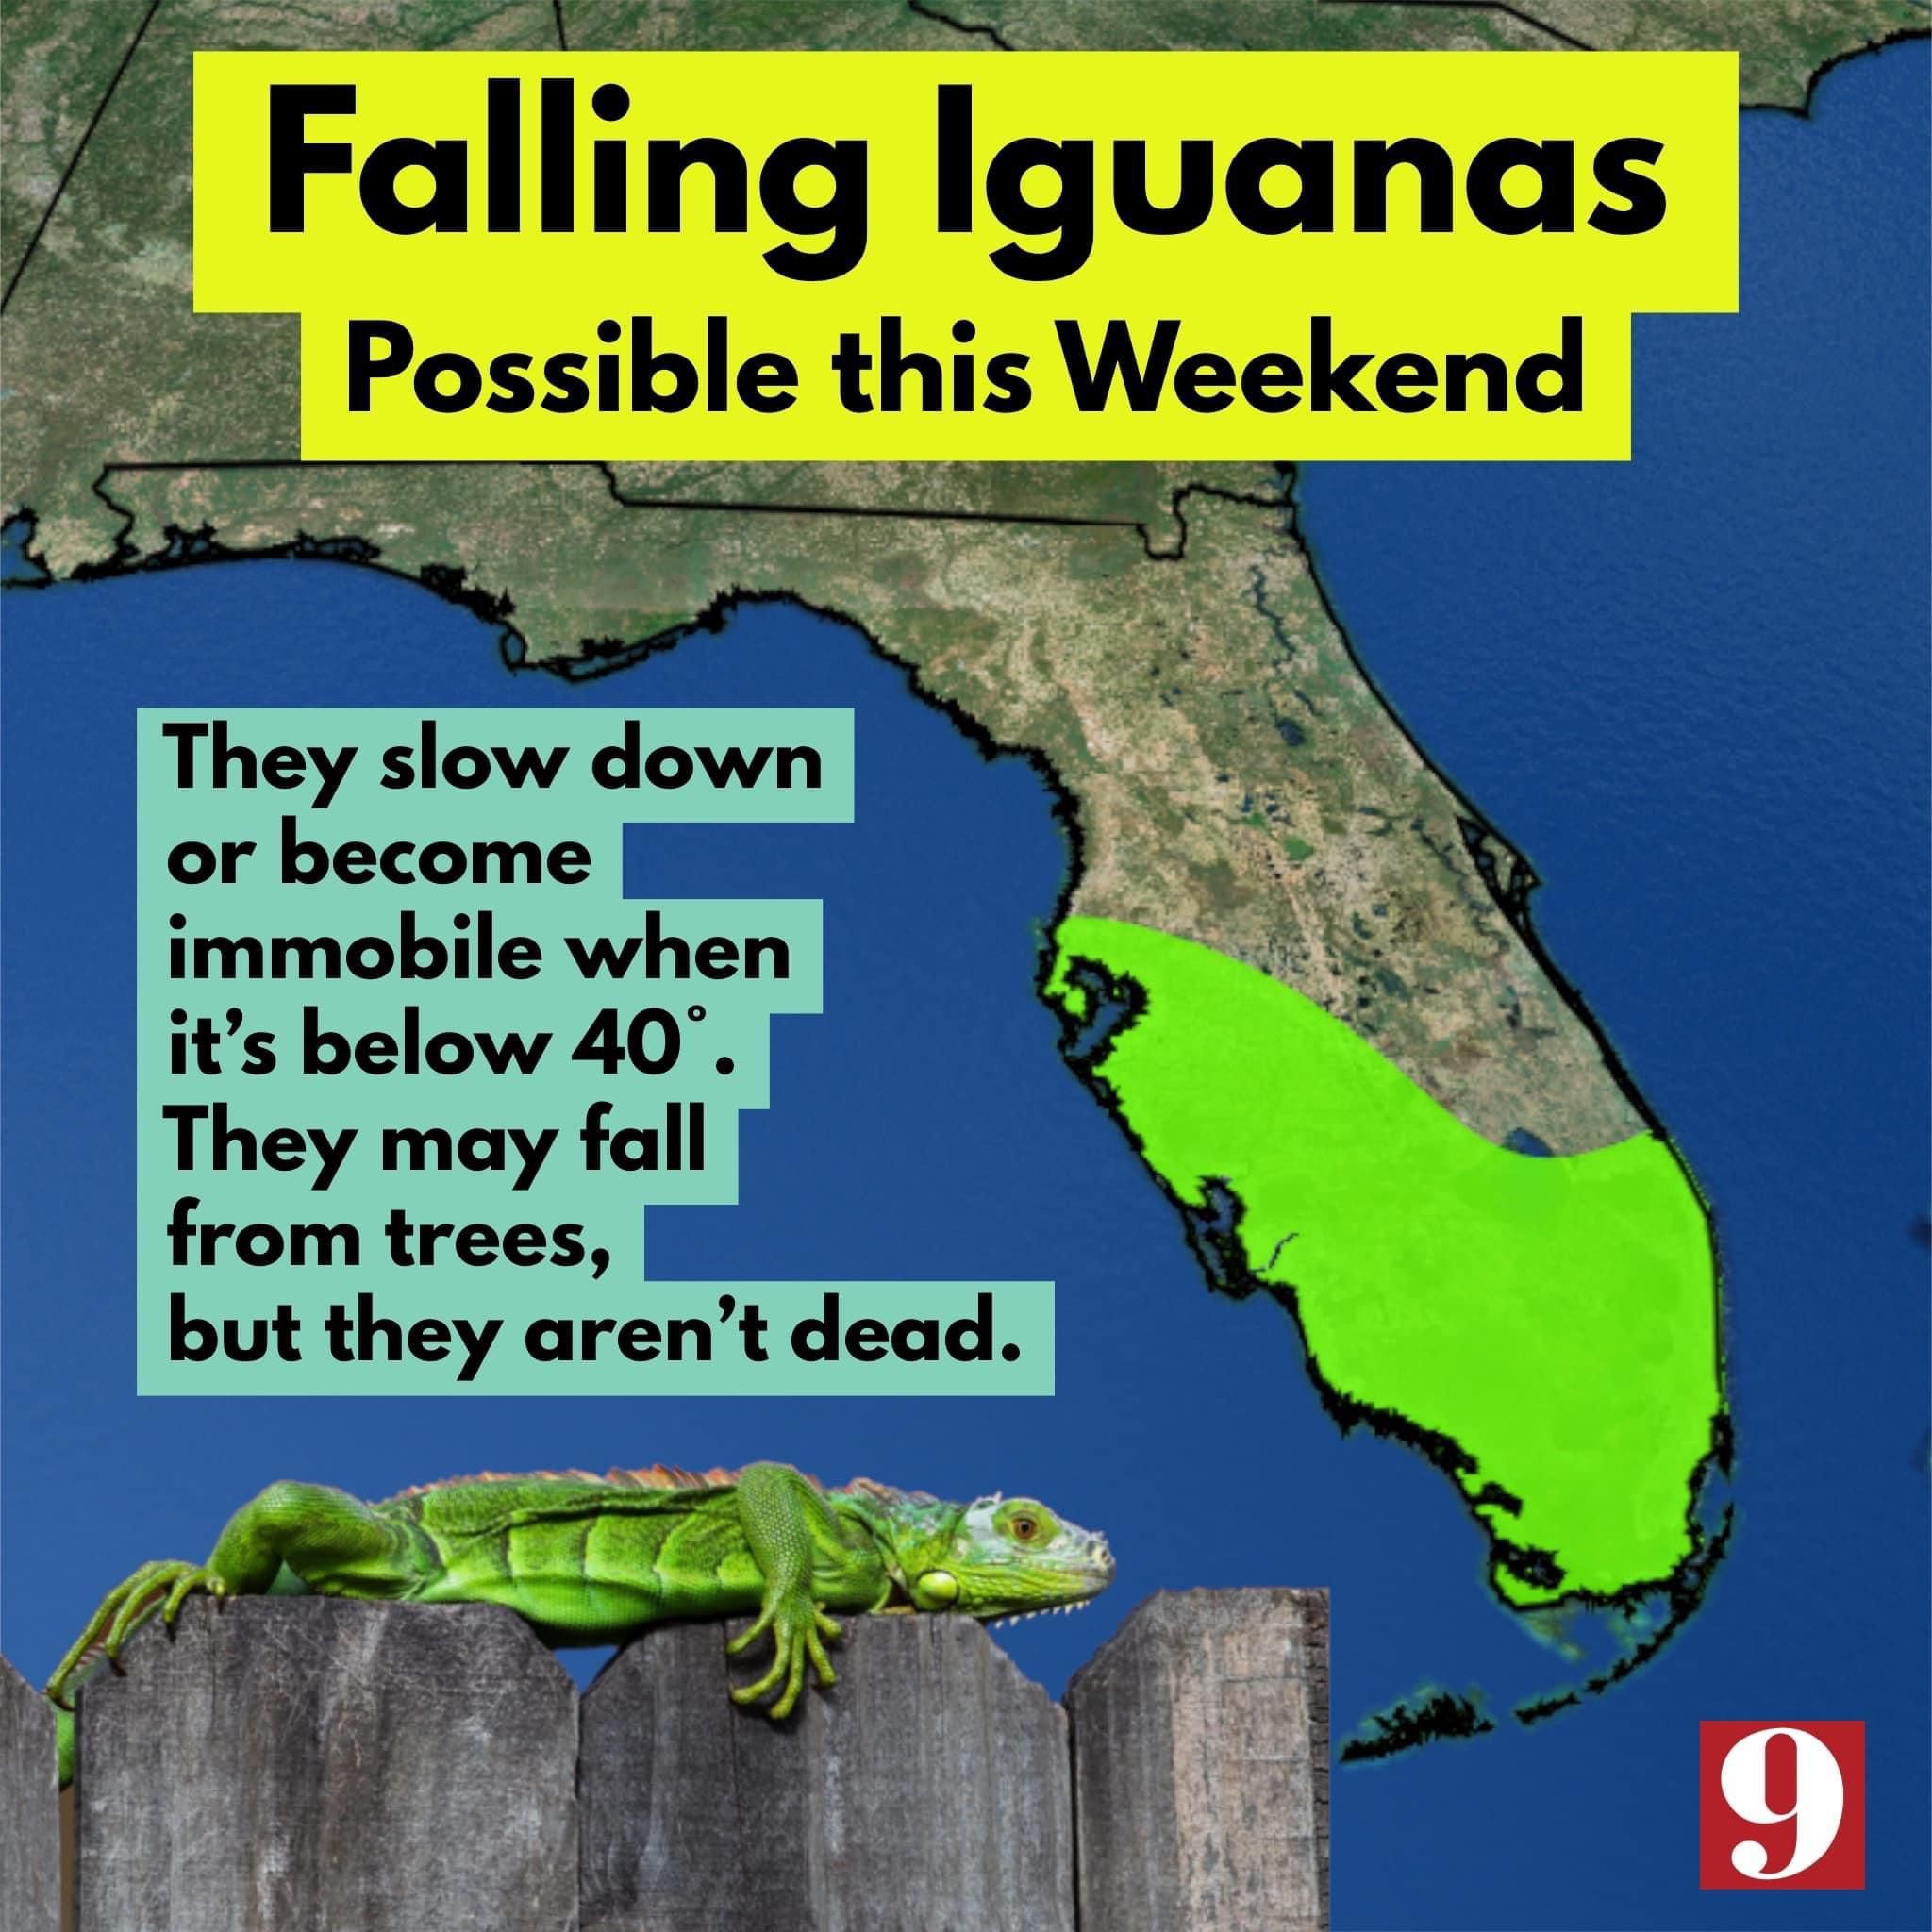 Actual PSA from Florida news station.